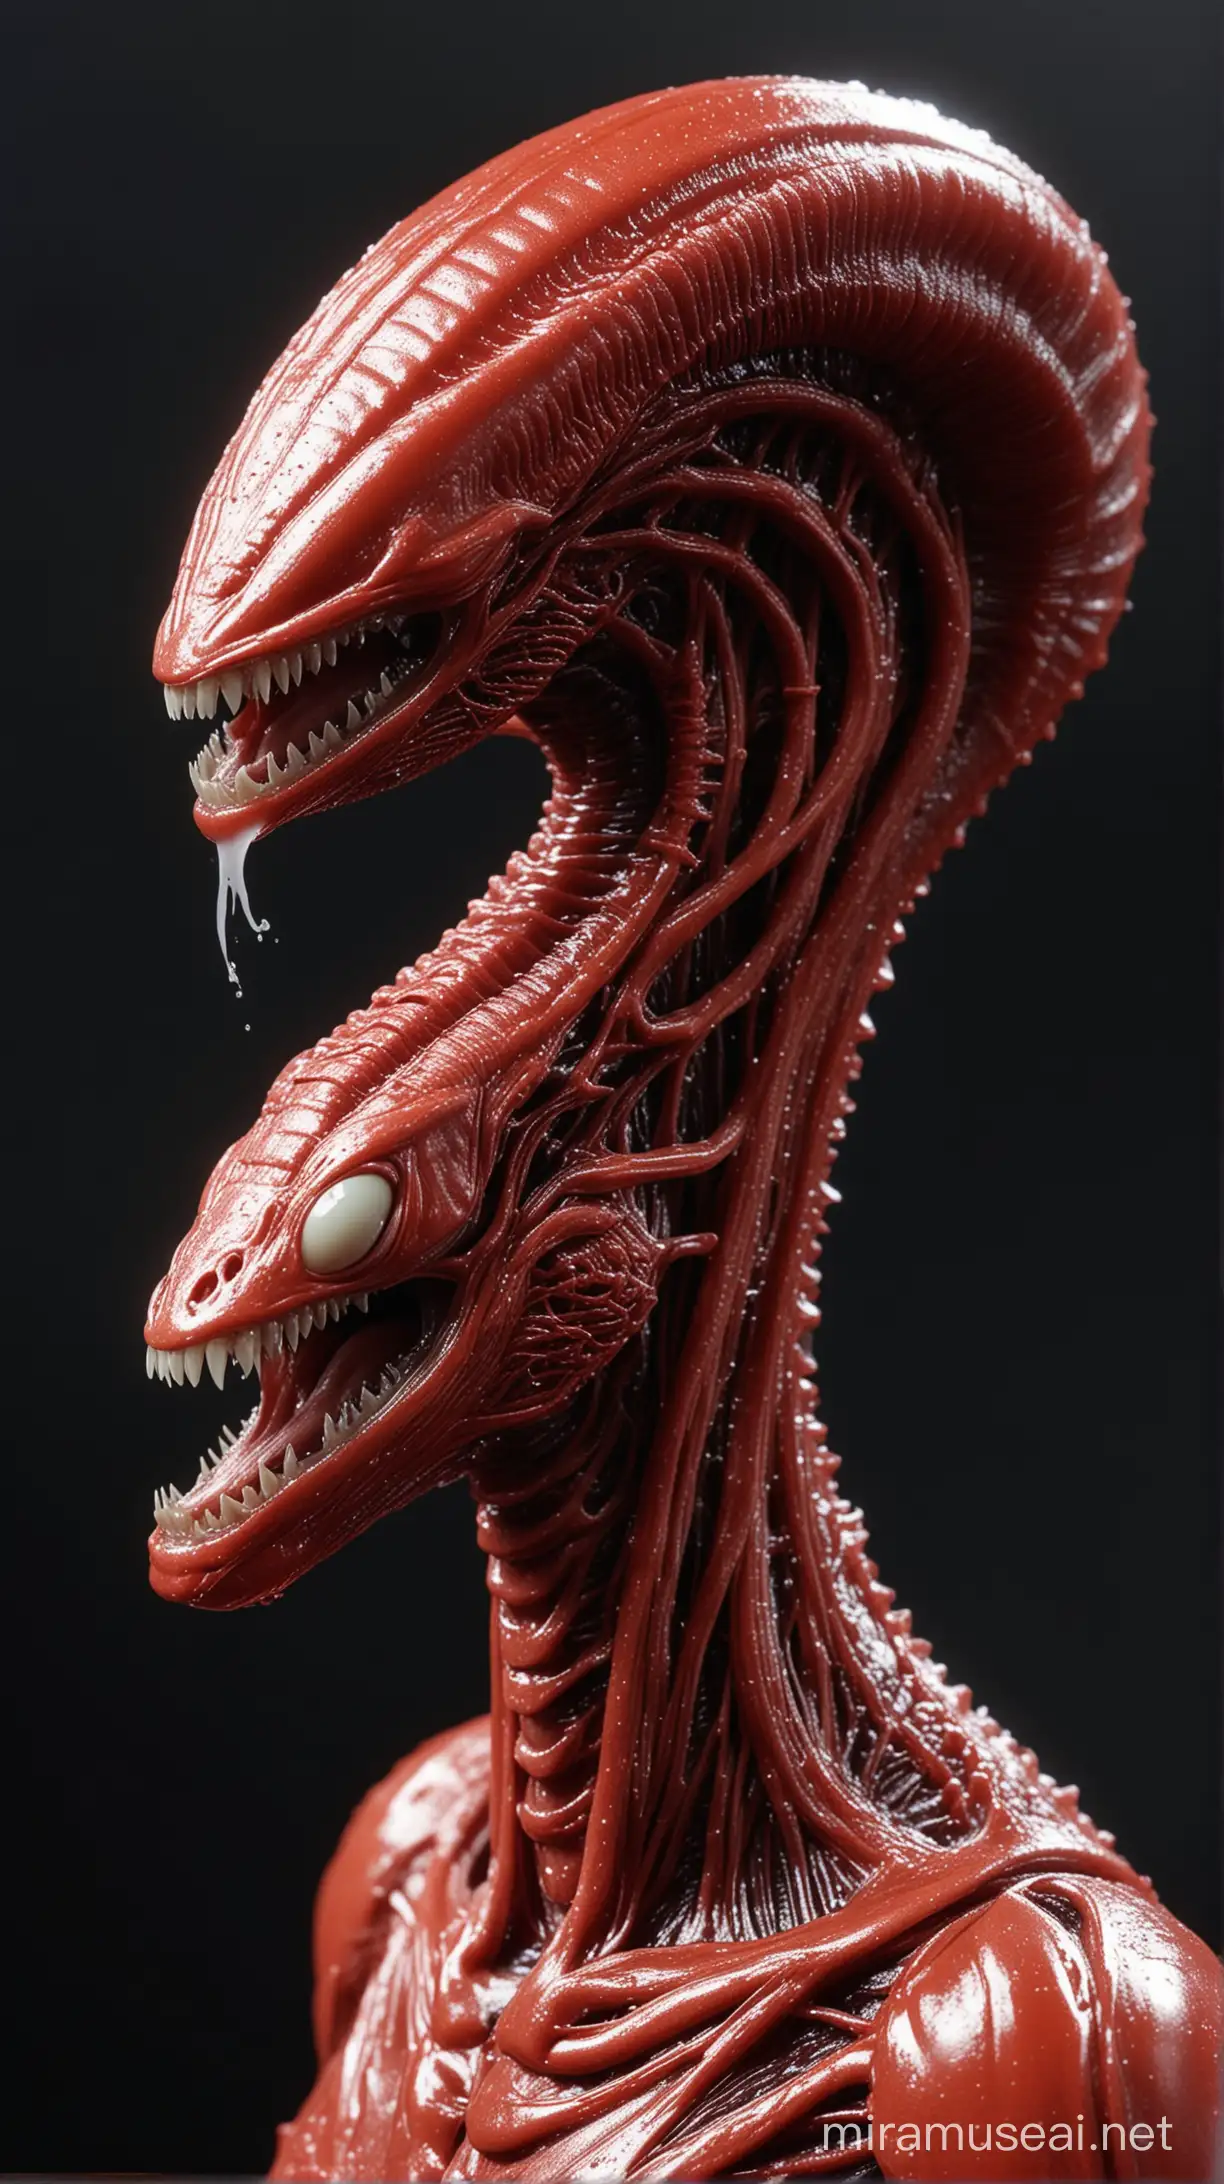 Hybrid slug without shell and xenomorph, very shiny body surface, like red soap. The hybrid slug has the head of a xenomorph, a long neck with protruding veins. Head very shiny, finely patterned in steampunk style, white teeth, flowing saliva, ukiyo-e, photo, cinematic